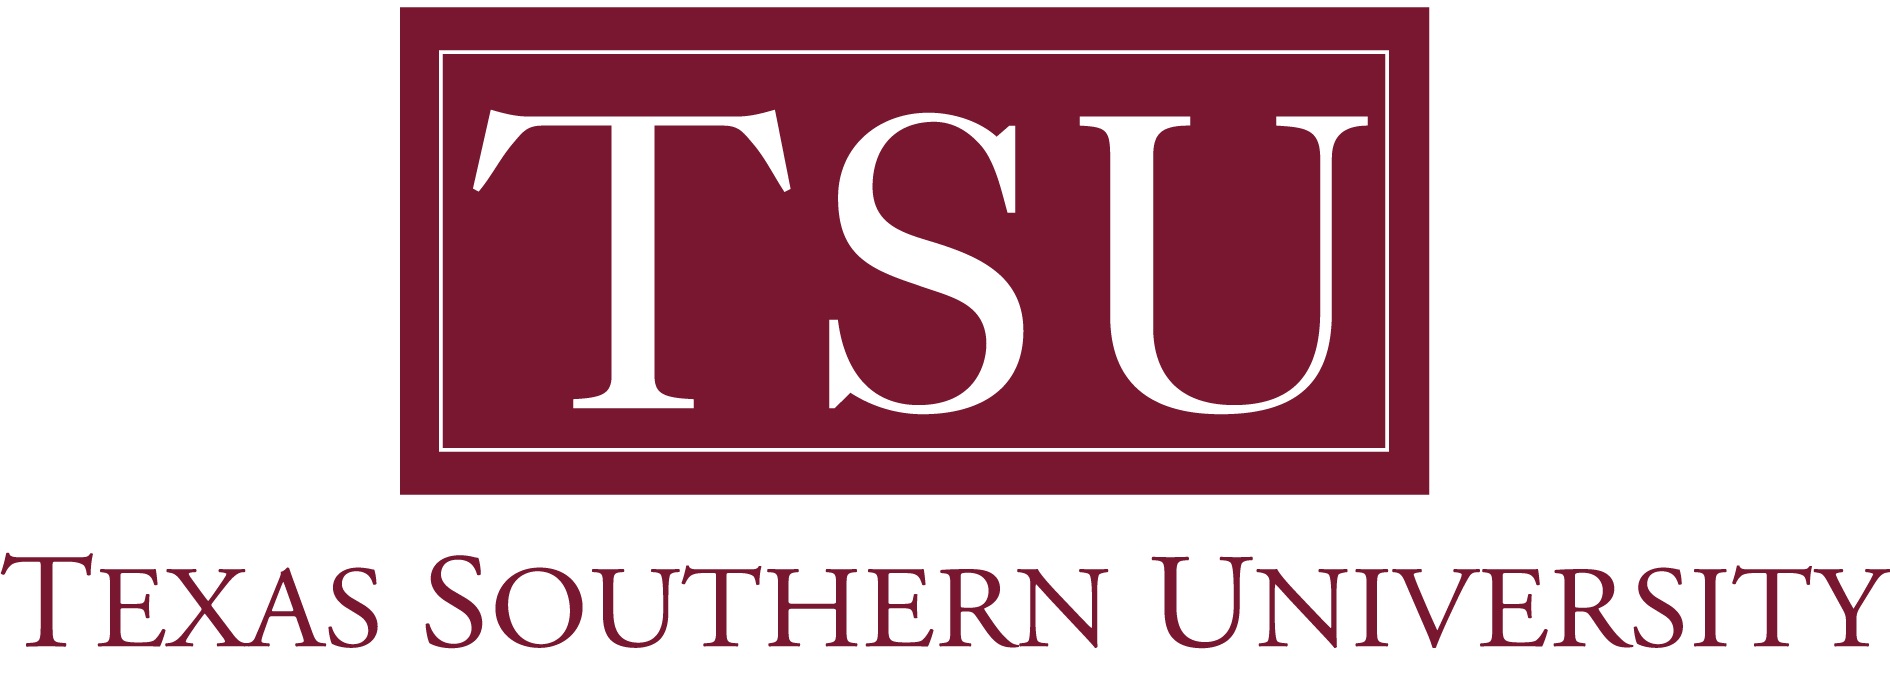 InsideTSU: The latest news and updates from Texas Southern University